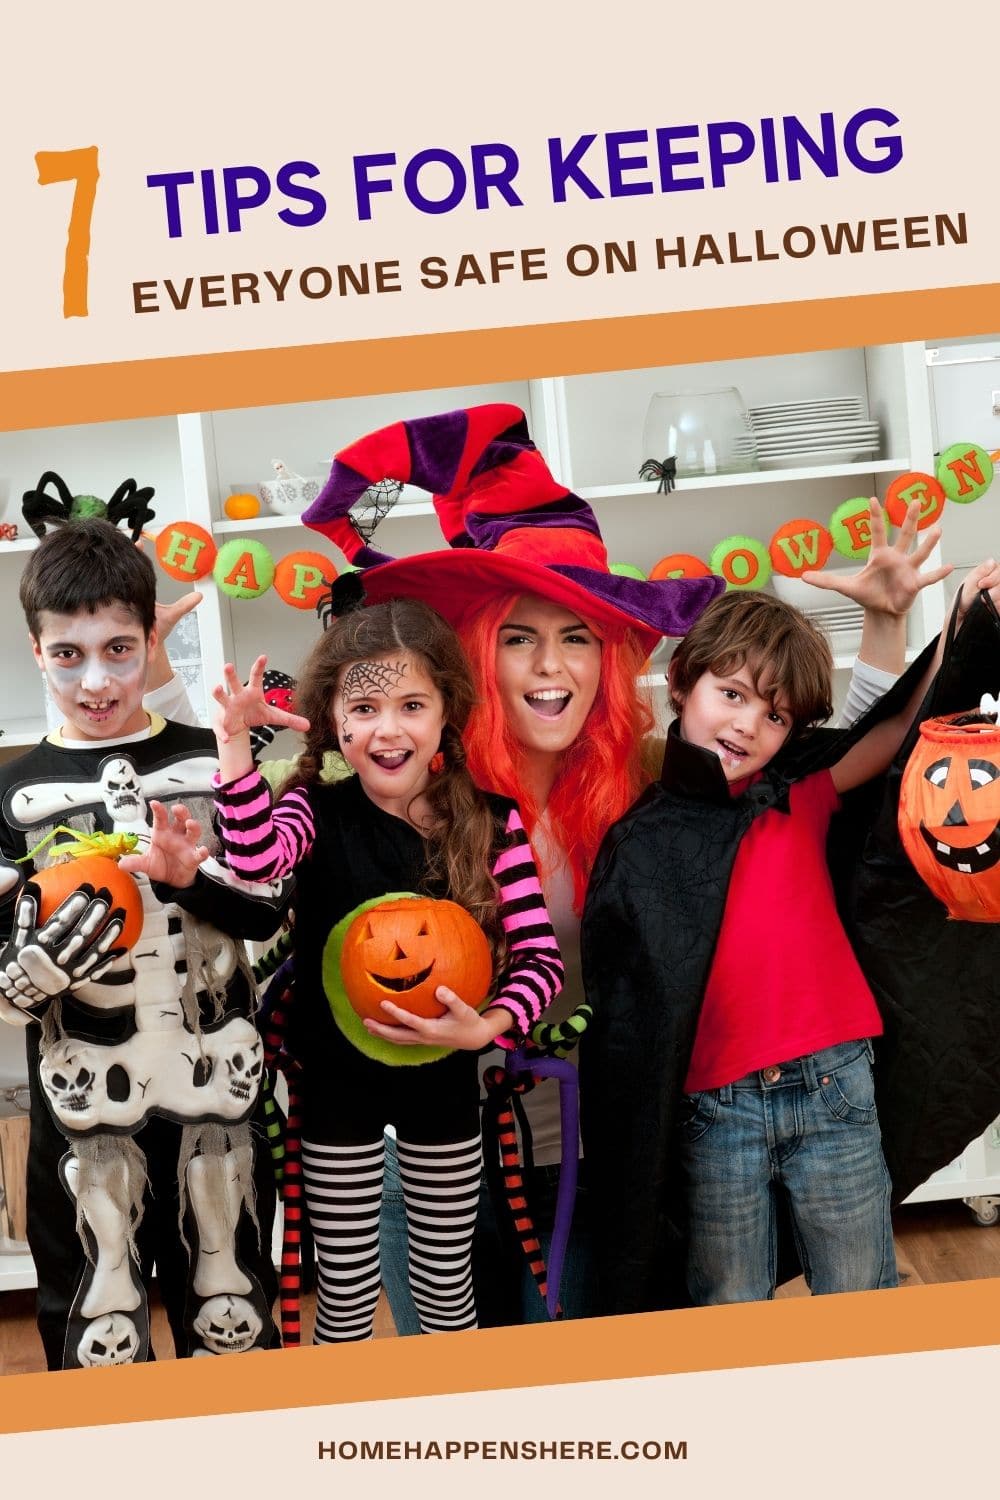 7 Things to Consider for Staying Safe on Halloween